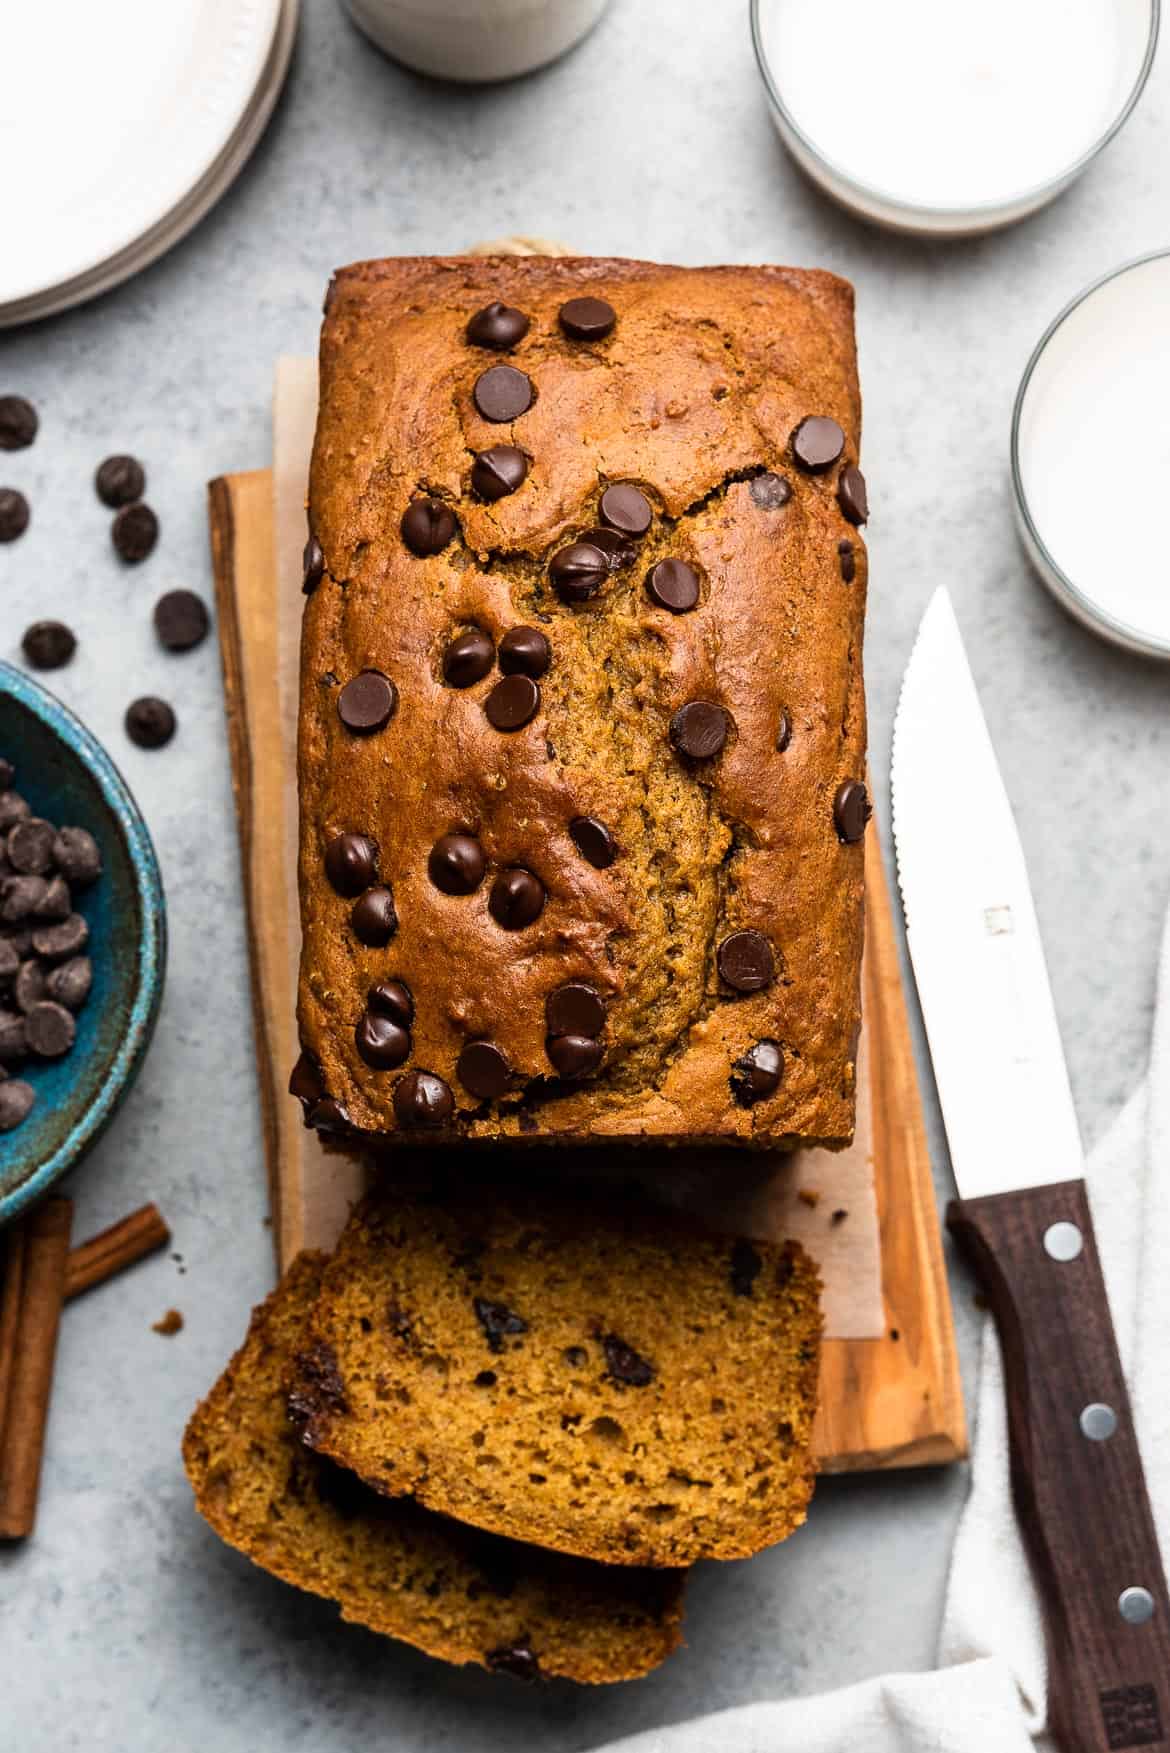 Slicing a loaf of Chocolate Chip Pumpkin Bread on a wooden board.